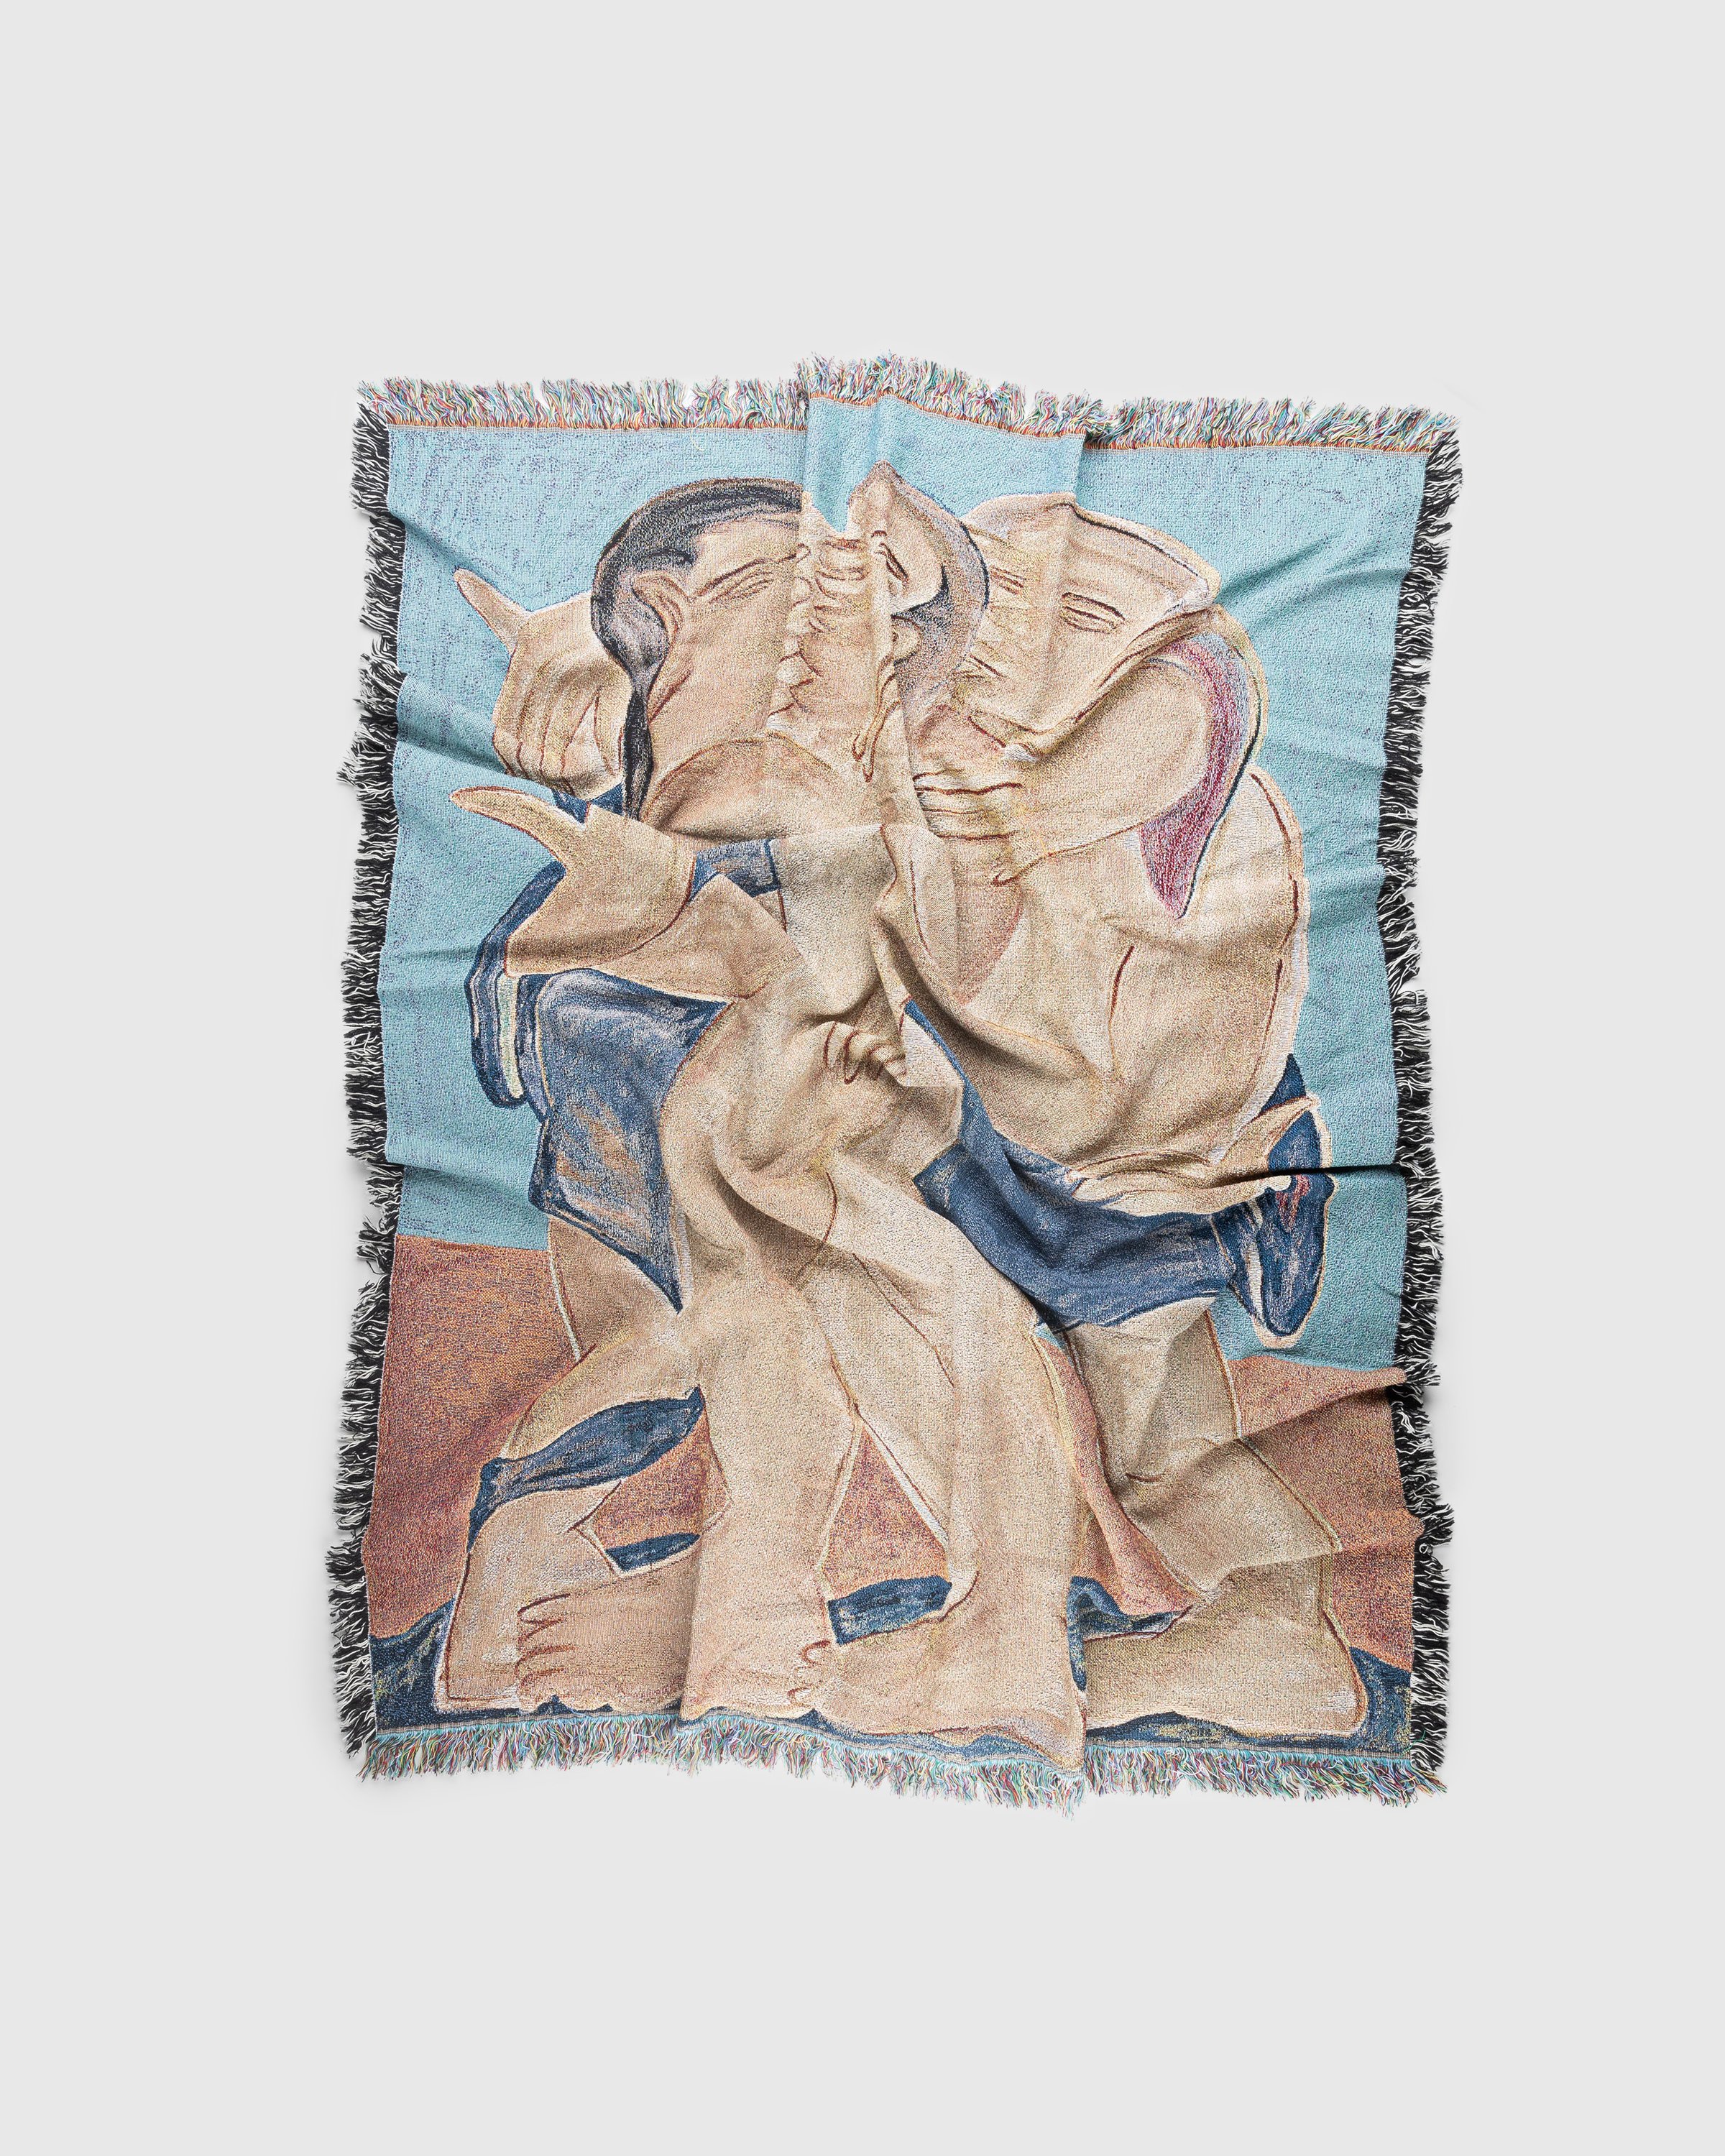 Carne Bollente - Tapesthreesome Tapestry - Lifestyle - Multi - Image 1